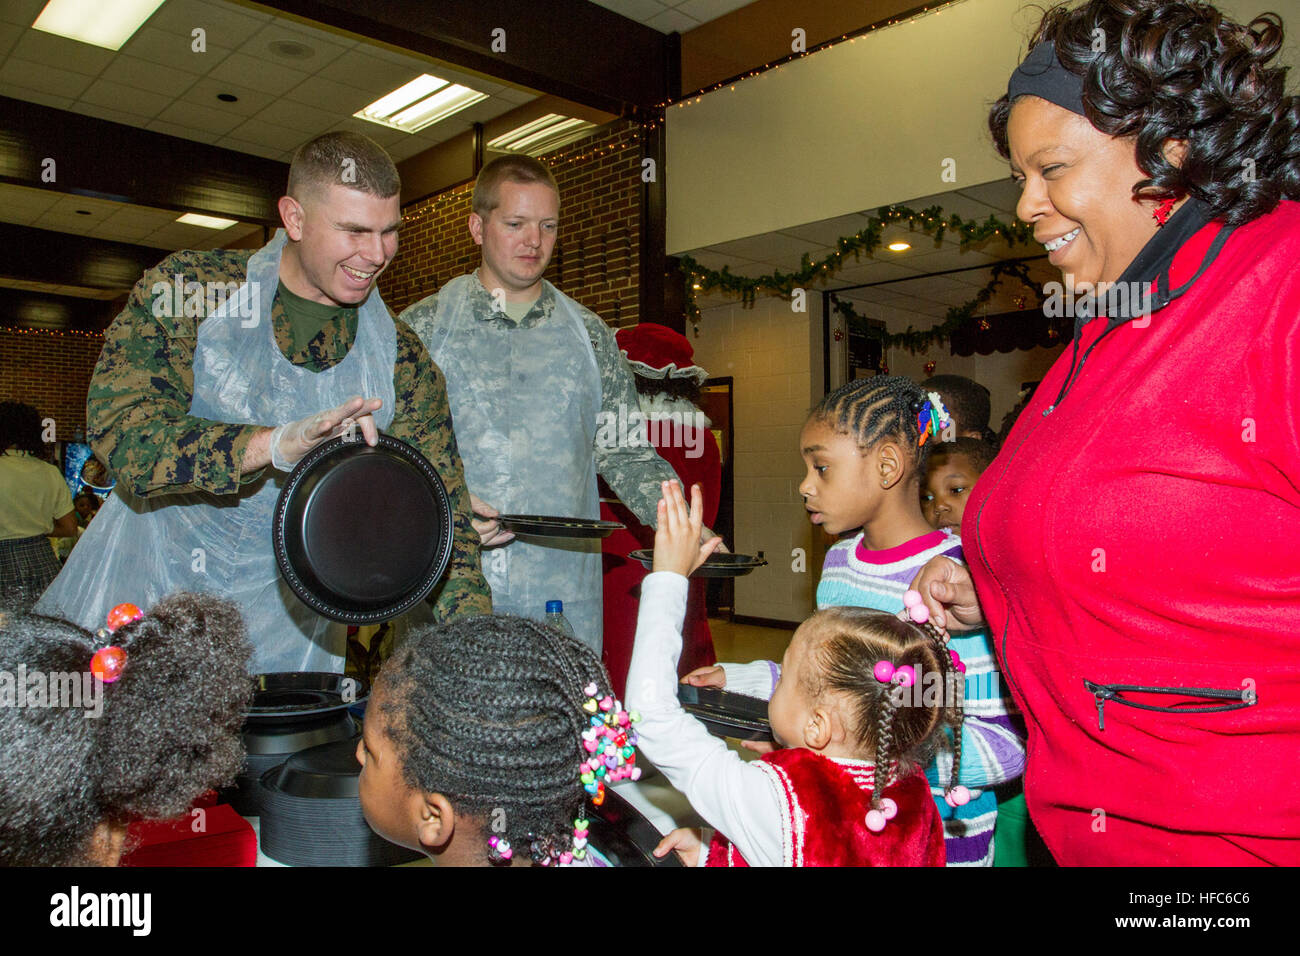 Marine Sgt. Ryan Stitzel, of Fleetwood, Pa., assigned to the Marine Barracks Washington exchanges smiles with a child as he serves her up a delicious warm lunch. Military and civilian personnel and their families, living or working at Joint Base Anacostia-Bolling (JBAB) volunteered and helped make the Christmas holiday season more joyful for nearly 300 youth in the District of Columbia's Ward 8 at a Disadvantaged Youth Holiday Party, sponsored by the Metropolitan Police Department's Seventh District on Dec. 18. The JBAB volunteers helped serve food to the children, pass out gifts and help with Stock Photo